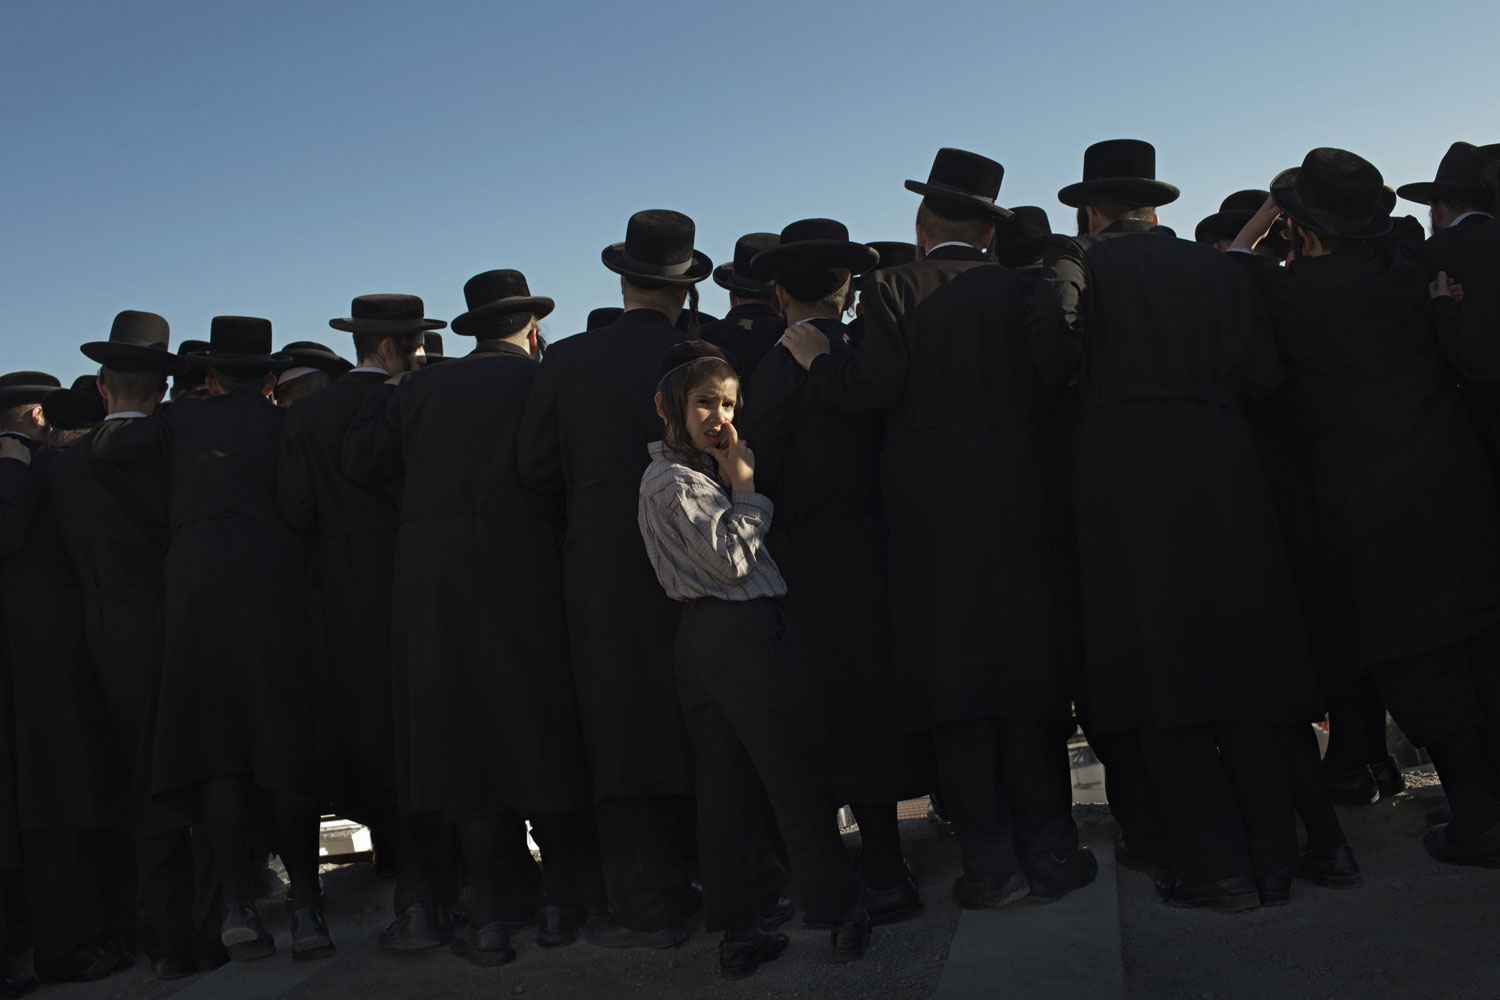 Aug. 23, 2012. Ultra-Orthodox Jewish men attend the funeral of Rabbi Abraham Chaim Roth on the Mount of Olives in Jerusalem.